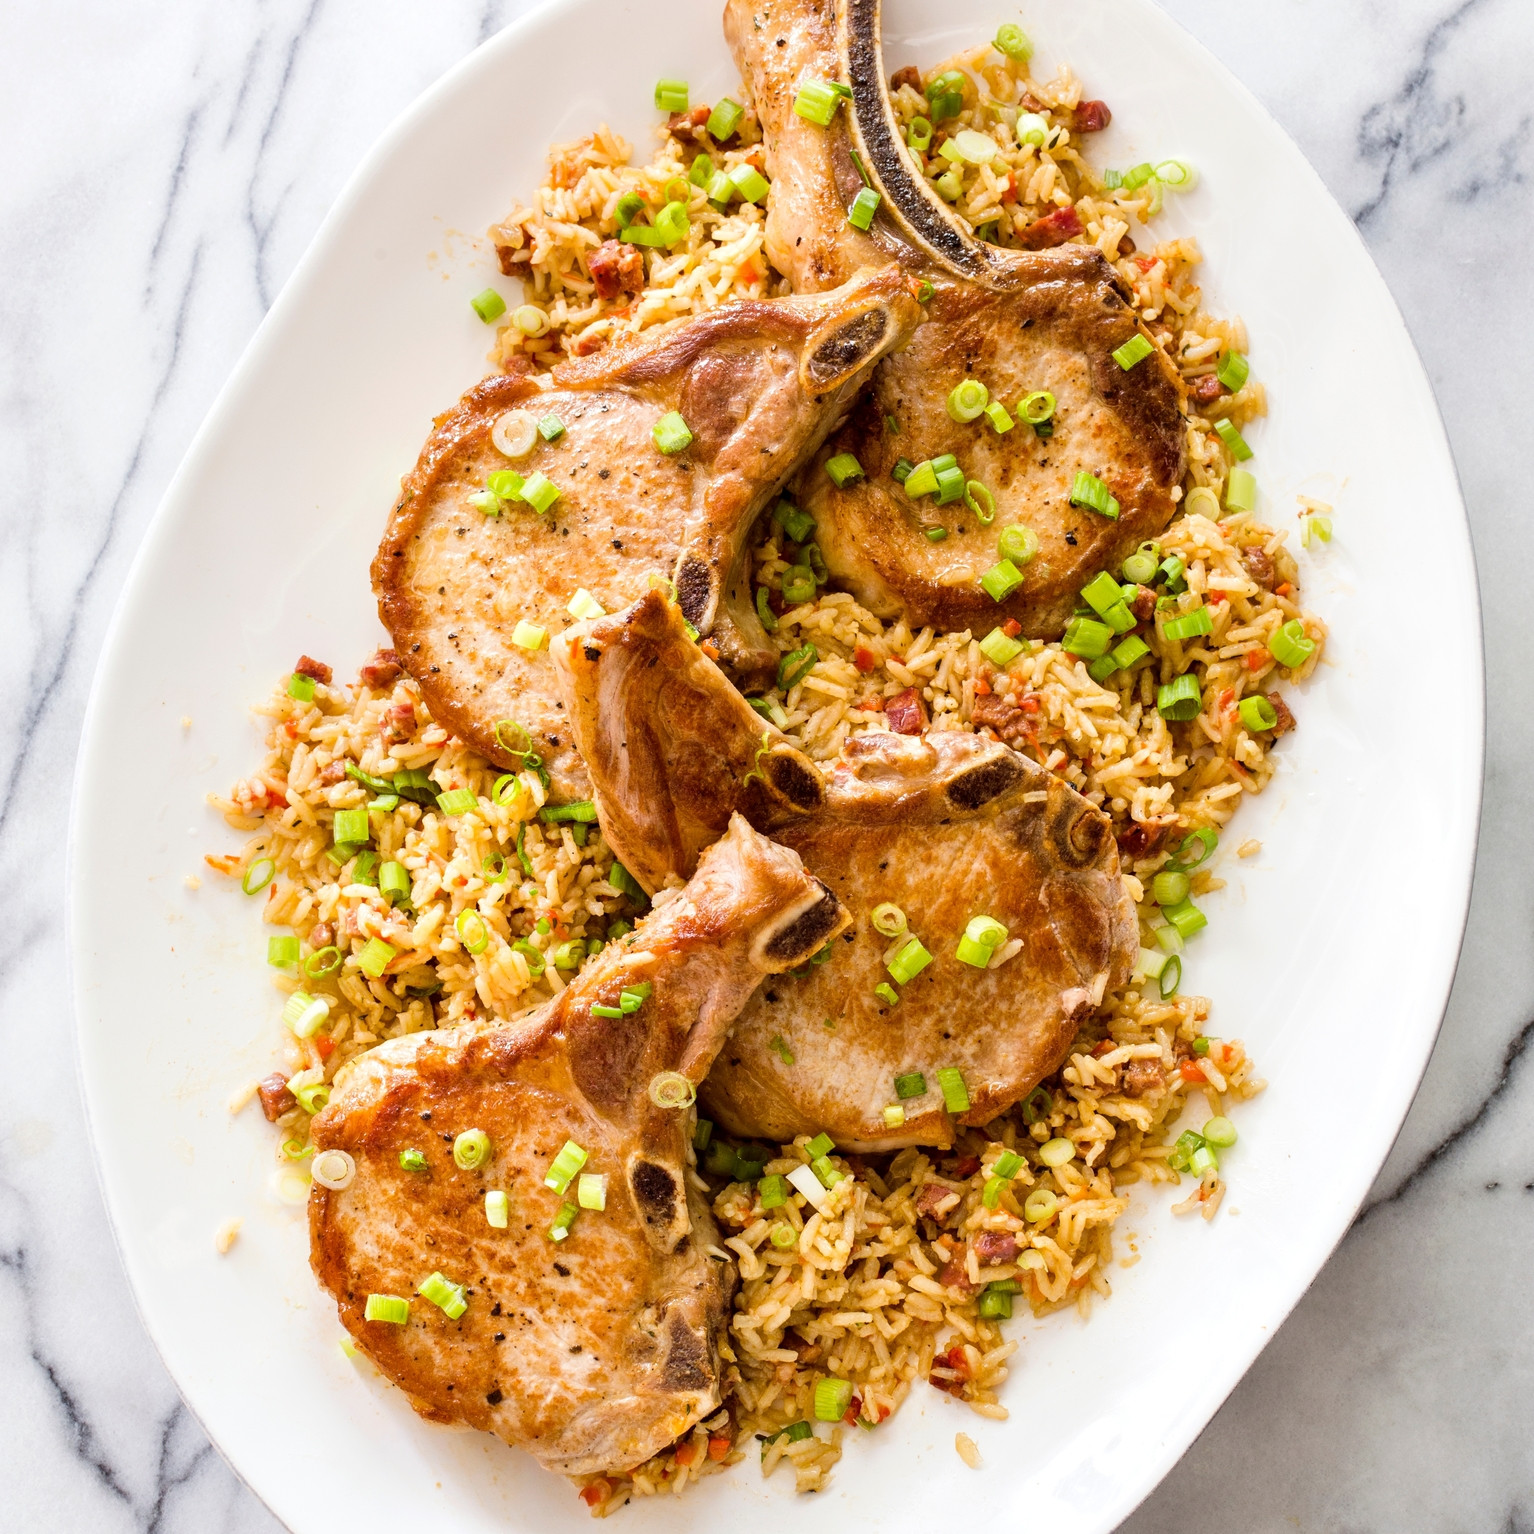 Pork Chops And Rice Recipe
 Cast Iron Pork Chops and Dirty Rice